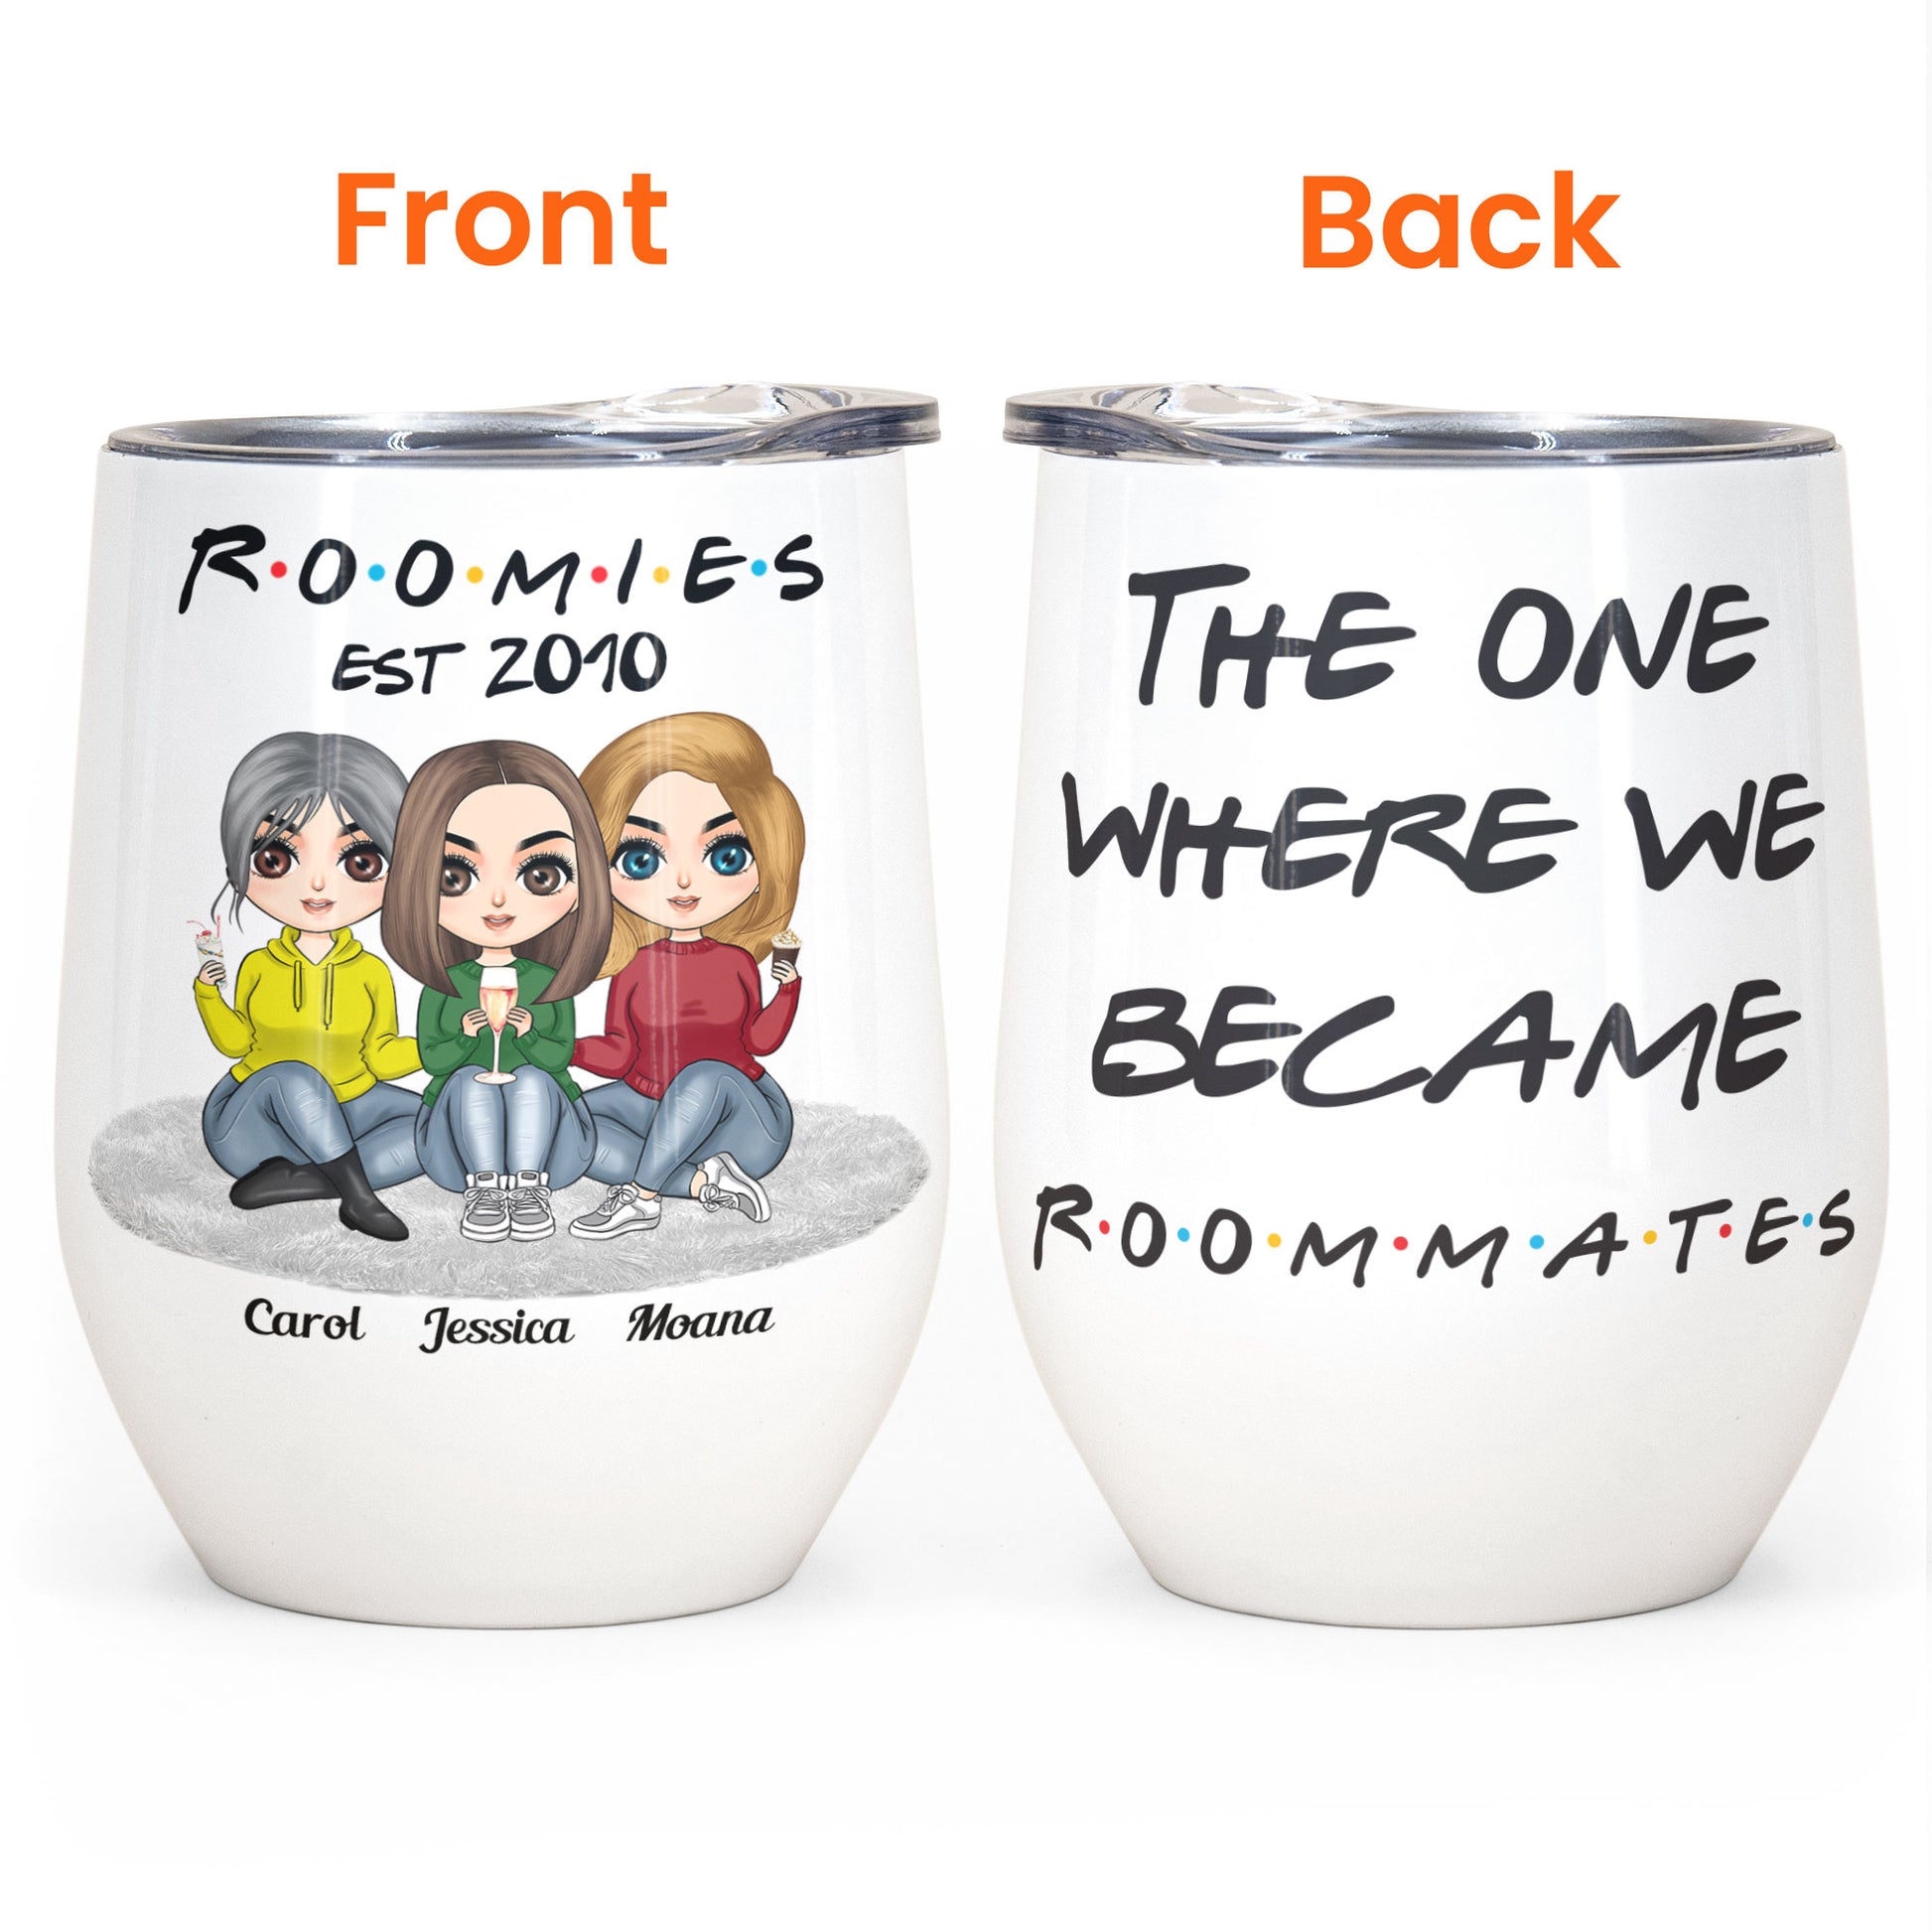 The One Where We Became Roommates - Personalized Wine Tumbler - Birthday Gift For Friends, BFF, Besties, Roomies, Roomates - Cute Cartoon Girls